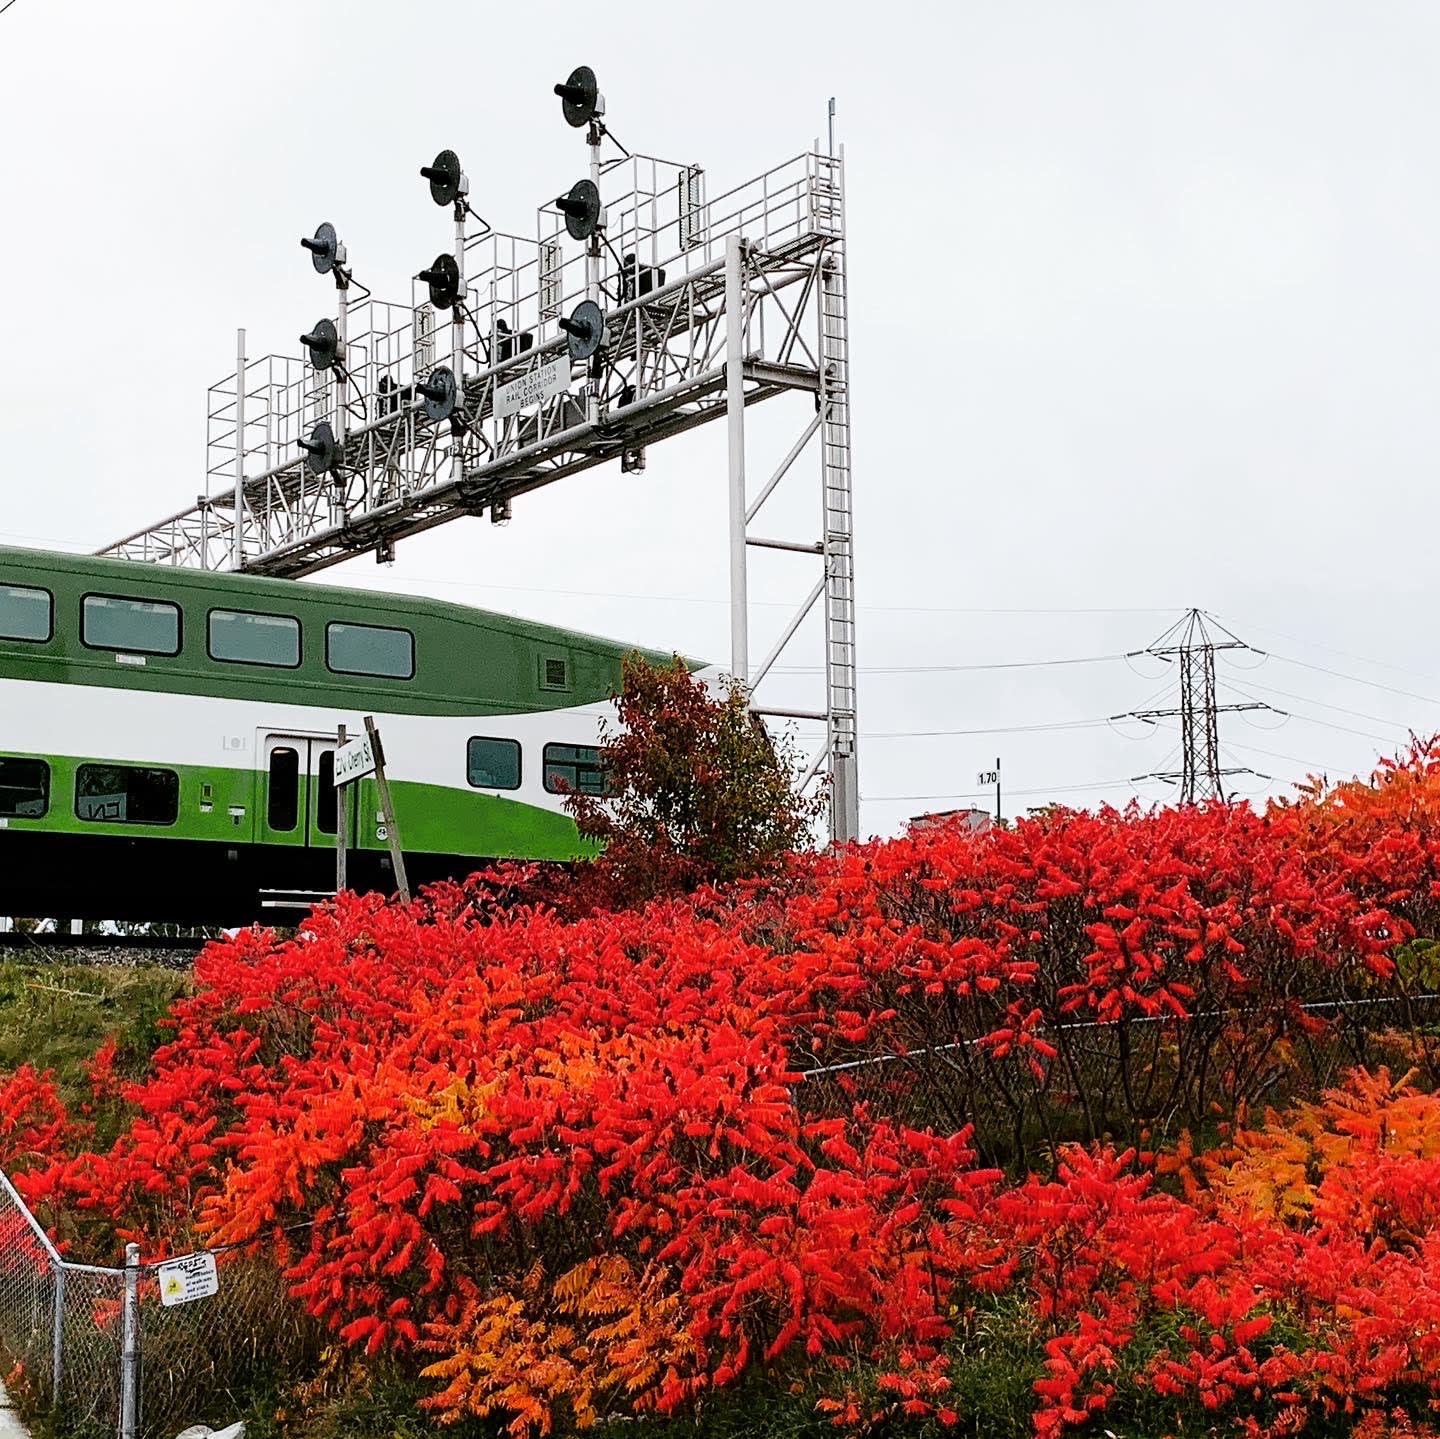 A train passes beside very red bushes.